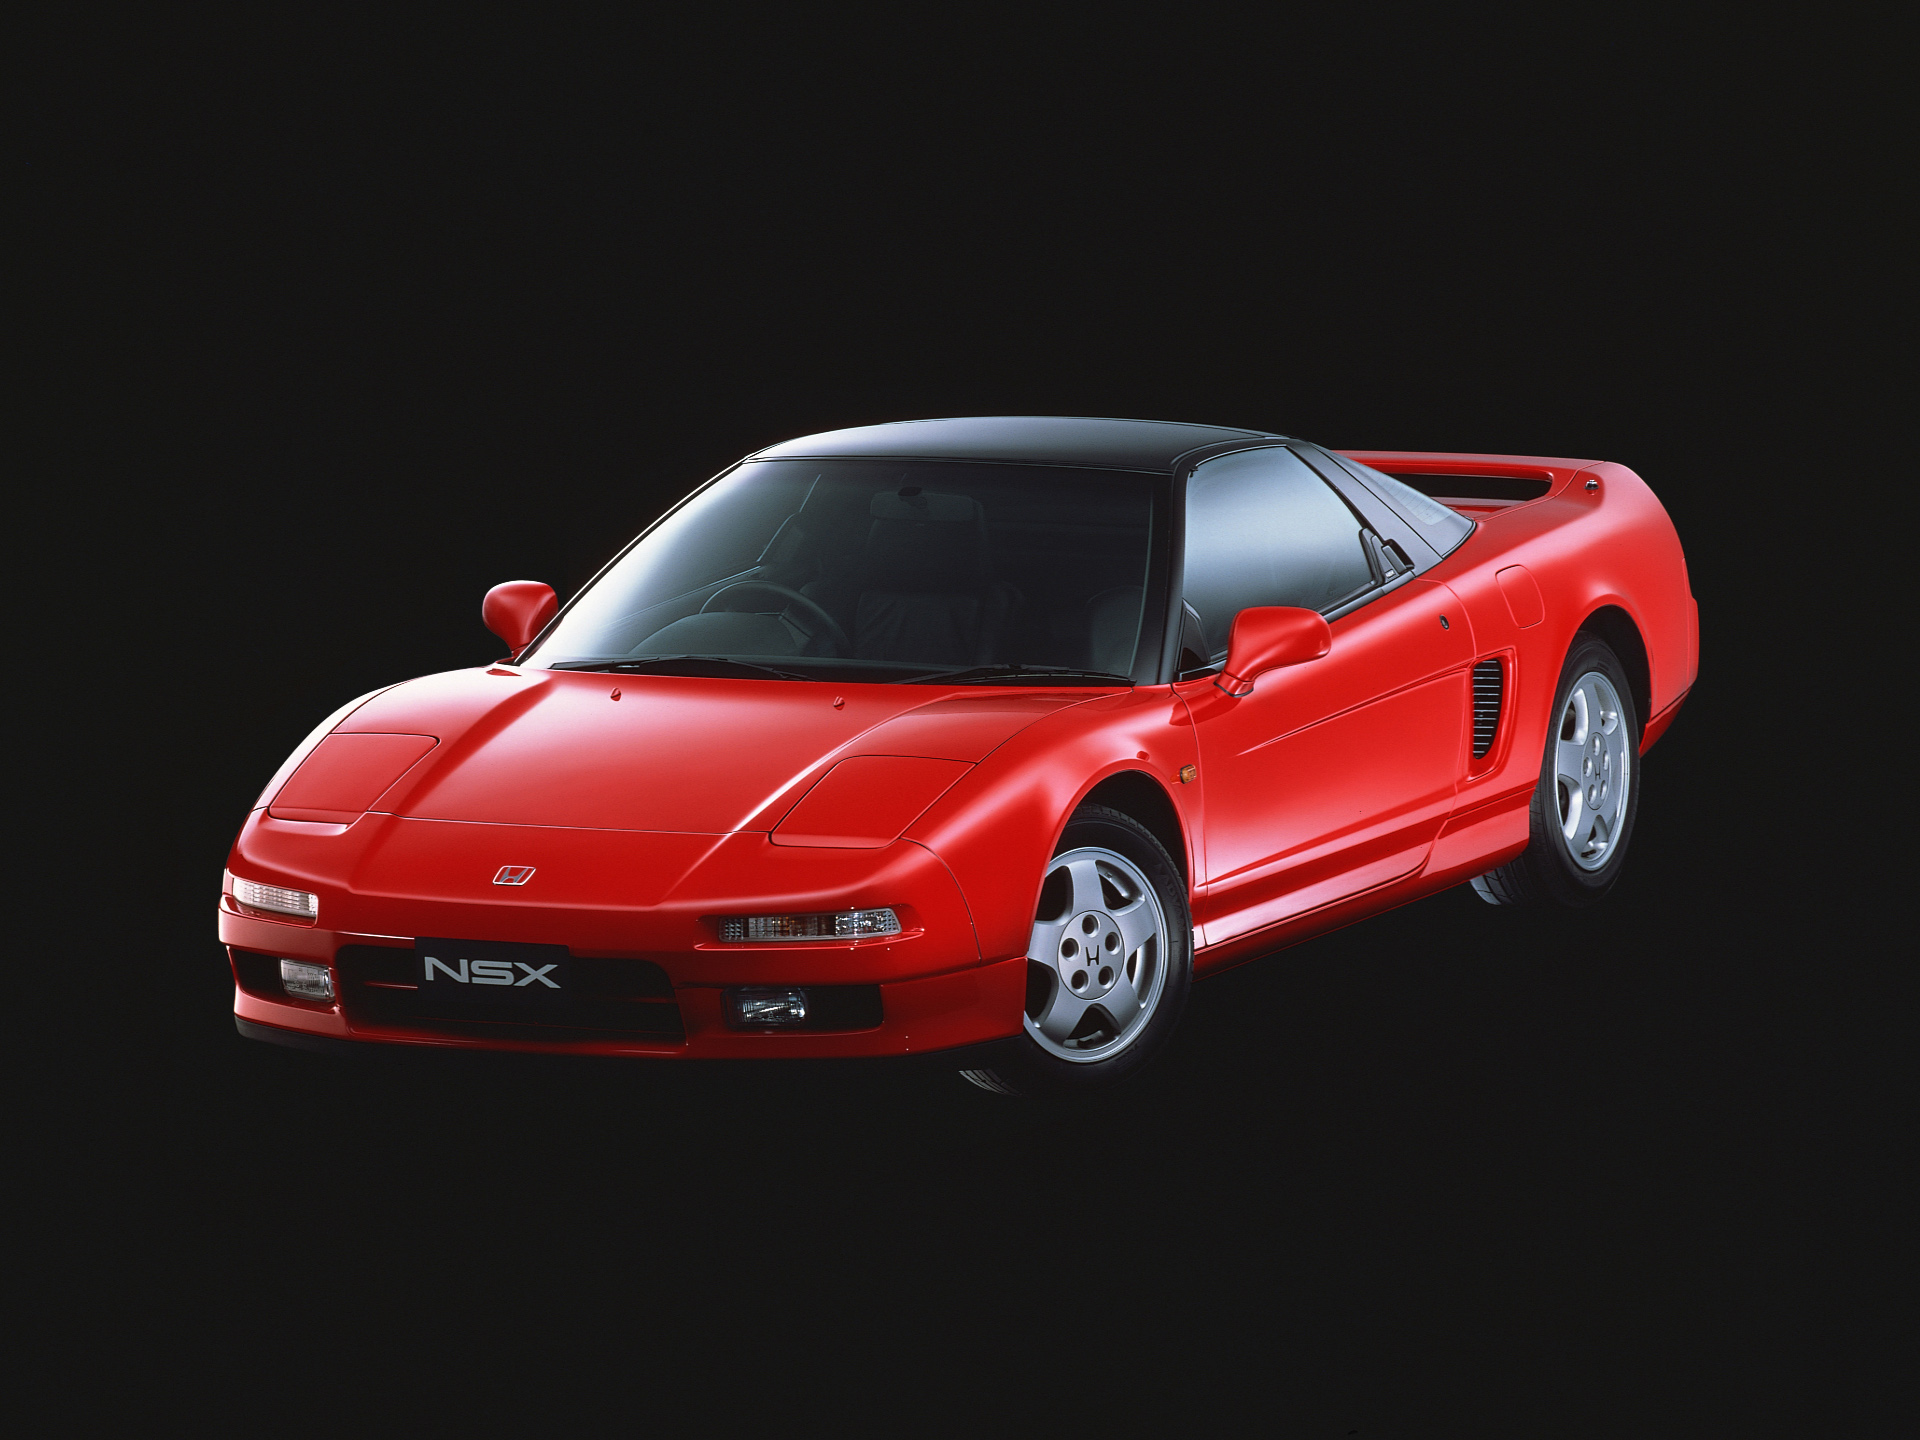 1990aei01 Honda Nsx Na1 Supercar Supercars Wallpapers Hd Desktop And Mobile Backgrounds